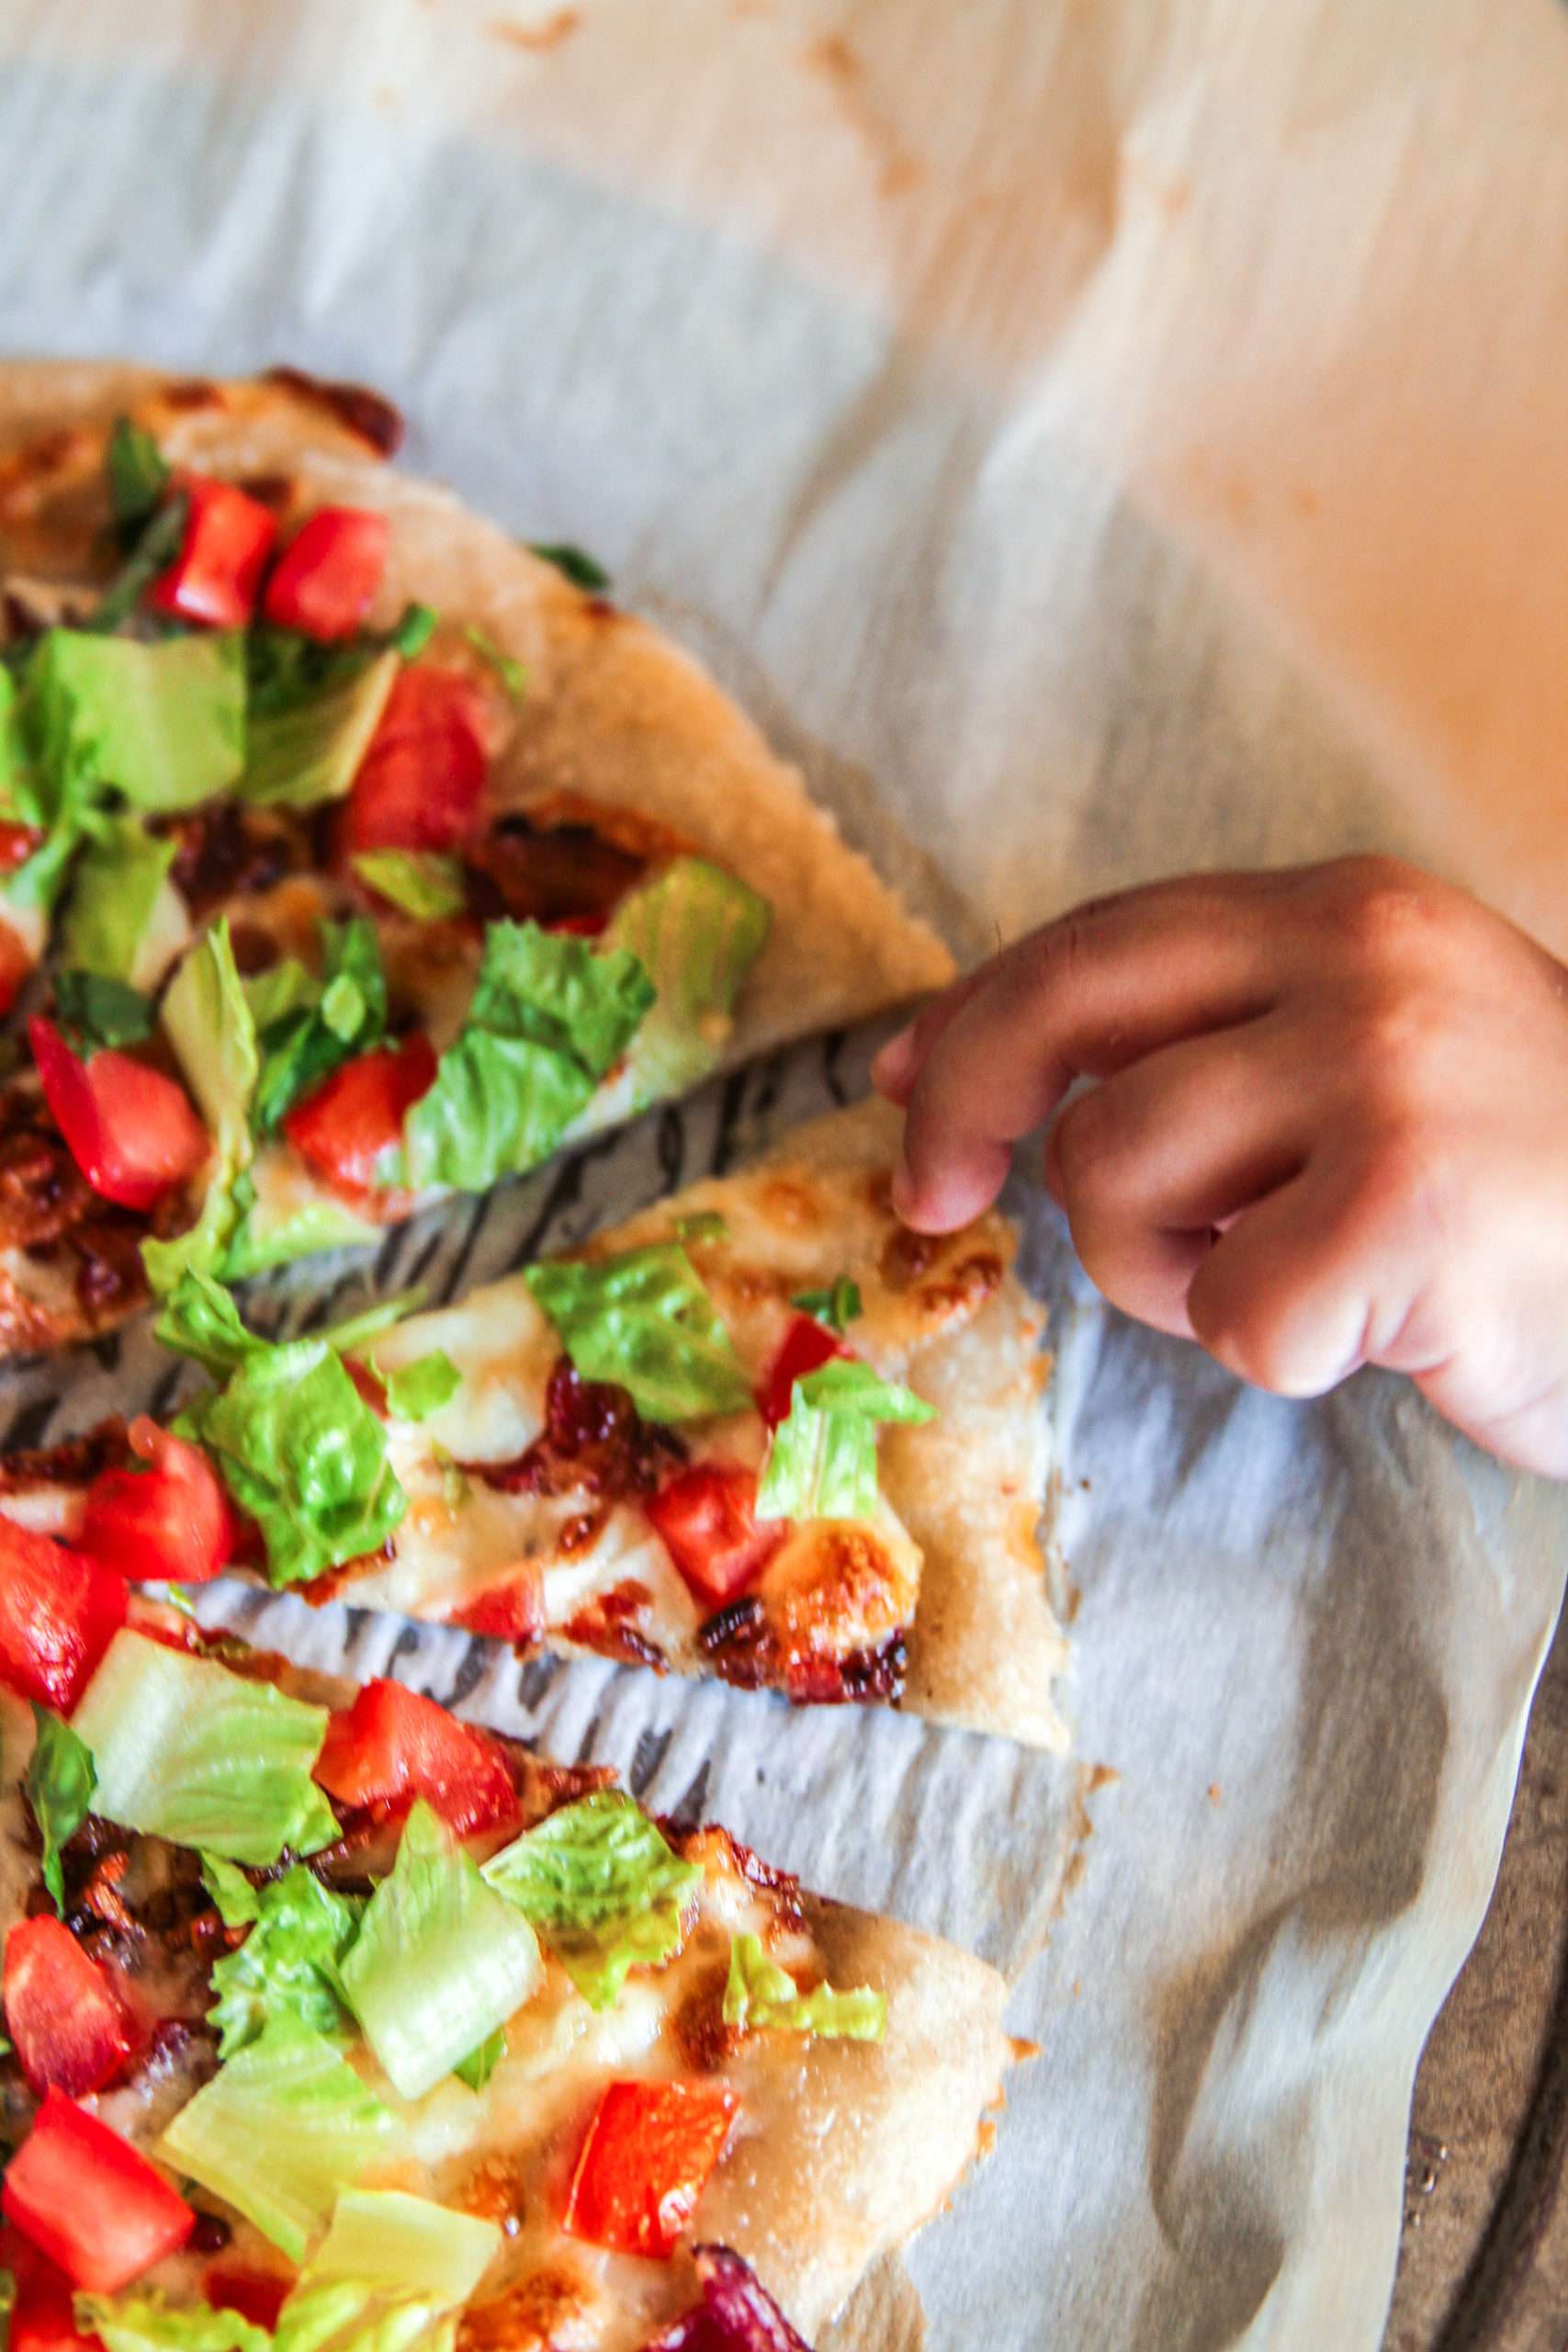 The easiest recipe for cooking a BLT pizza with kids